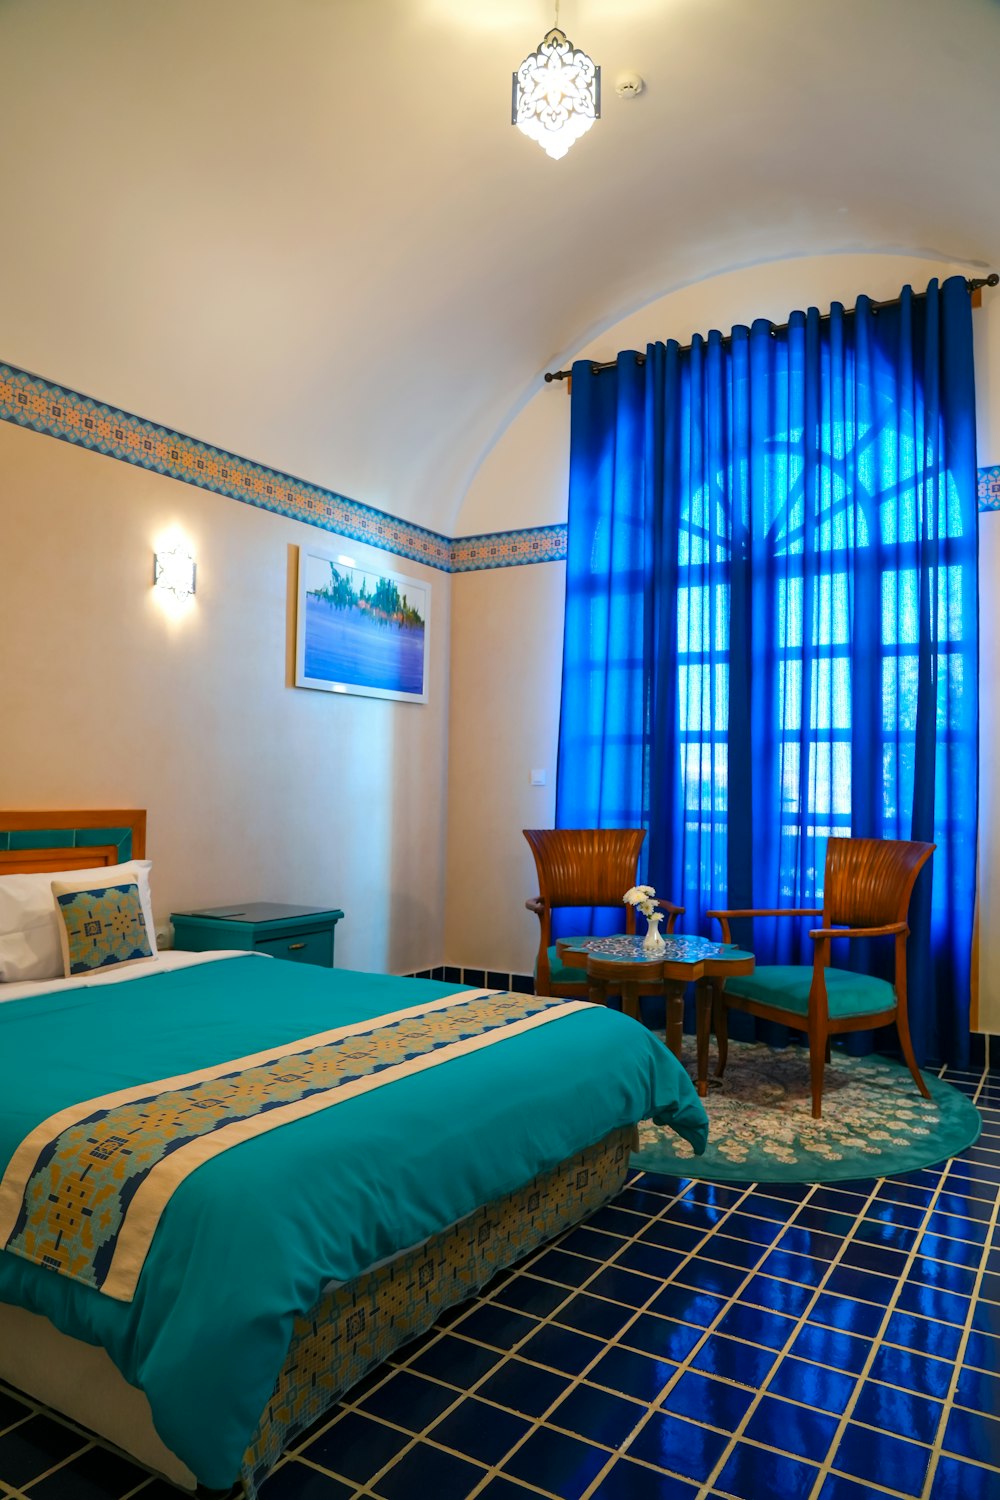 a bed room with a neatly made bed and blue curtains